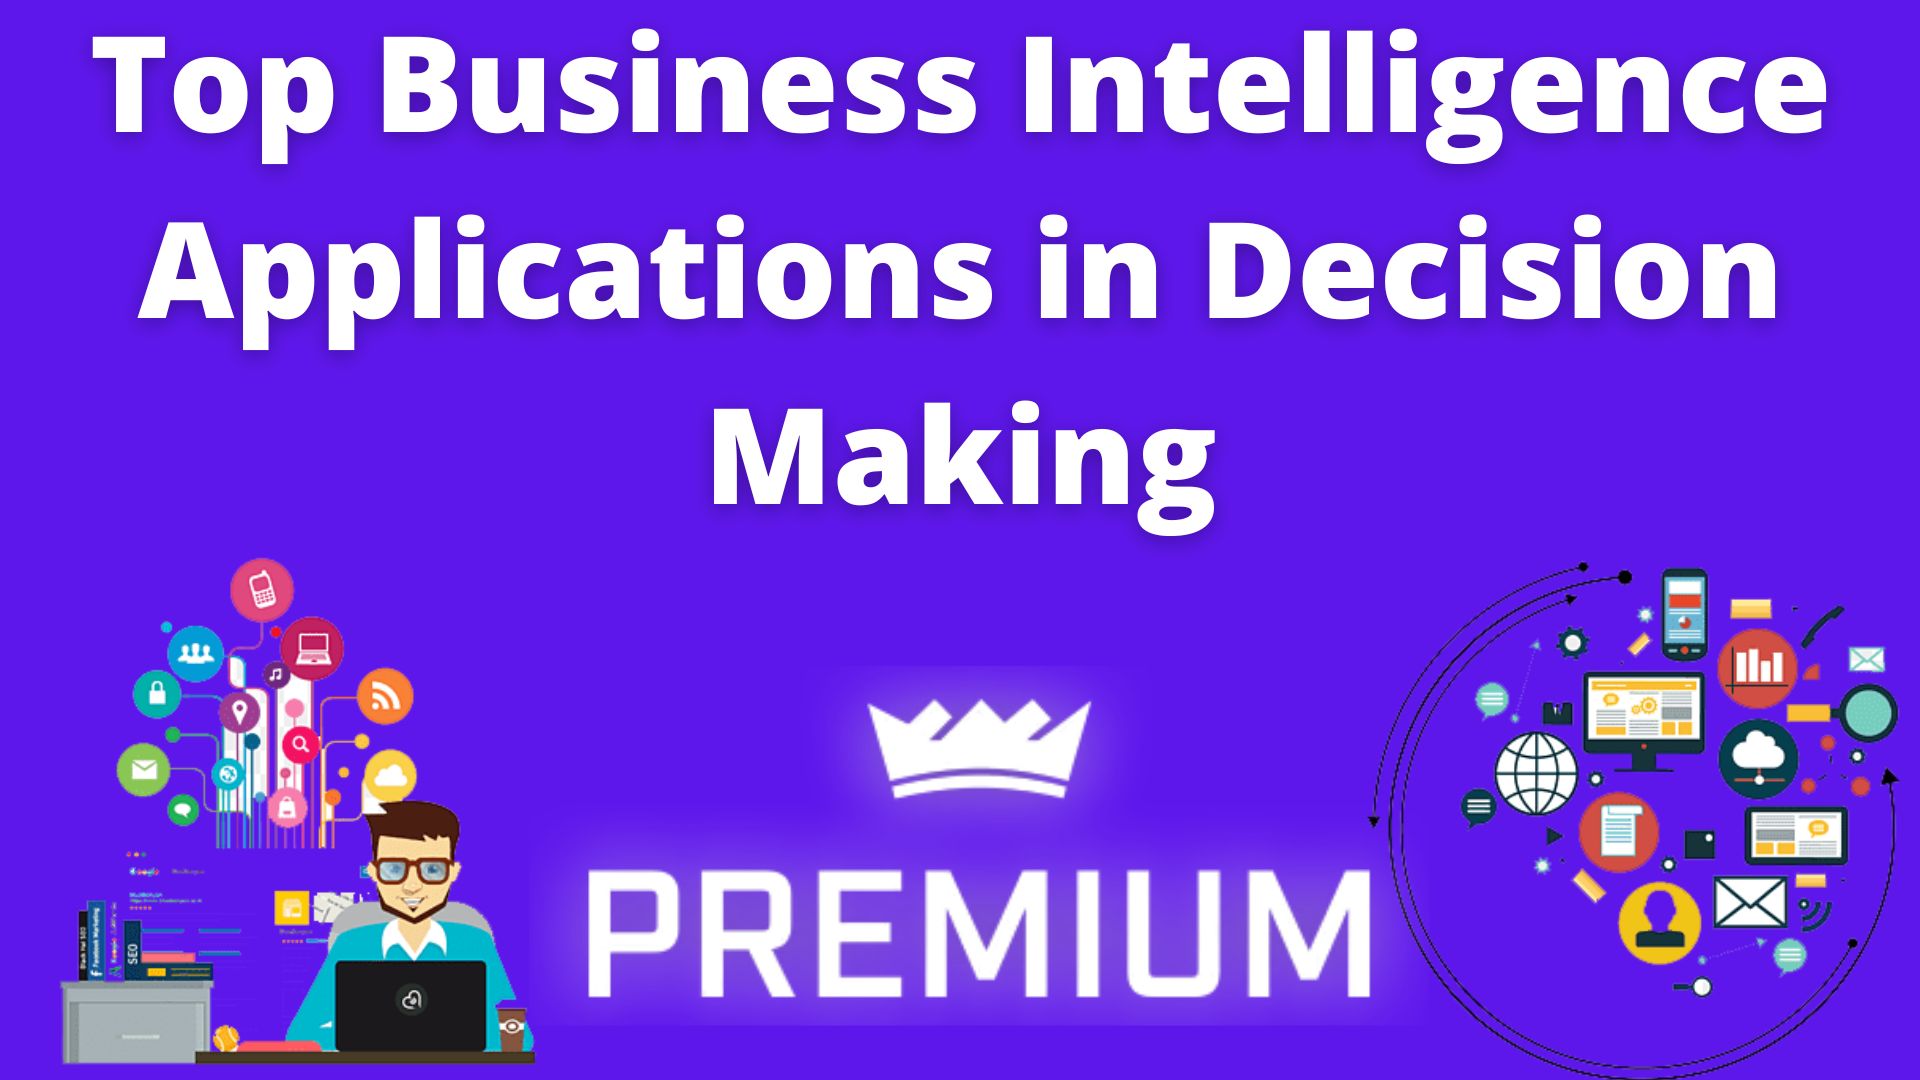 Top business intelligence applications in decision making